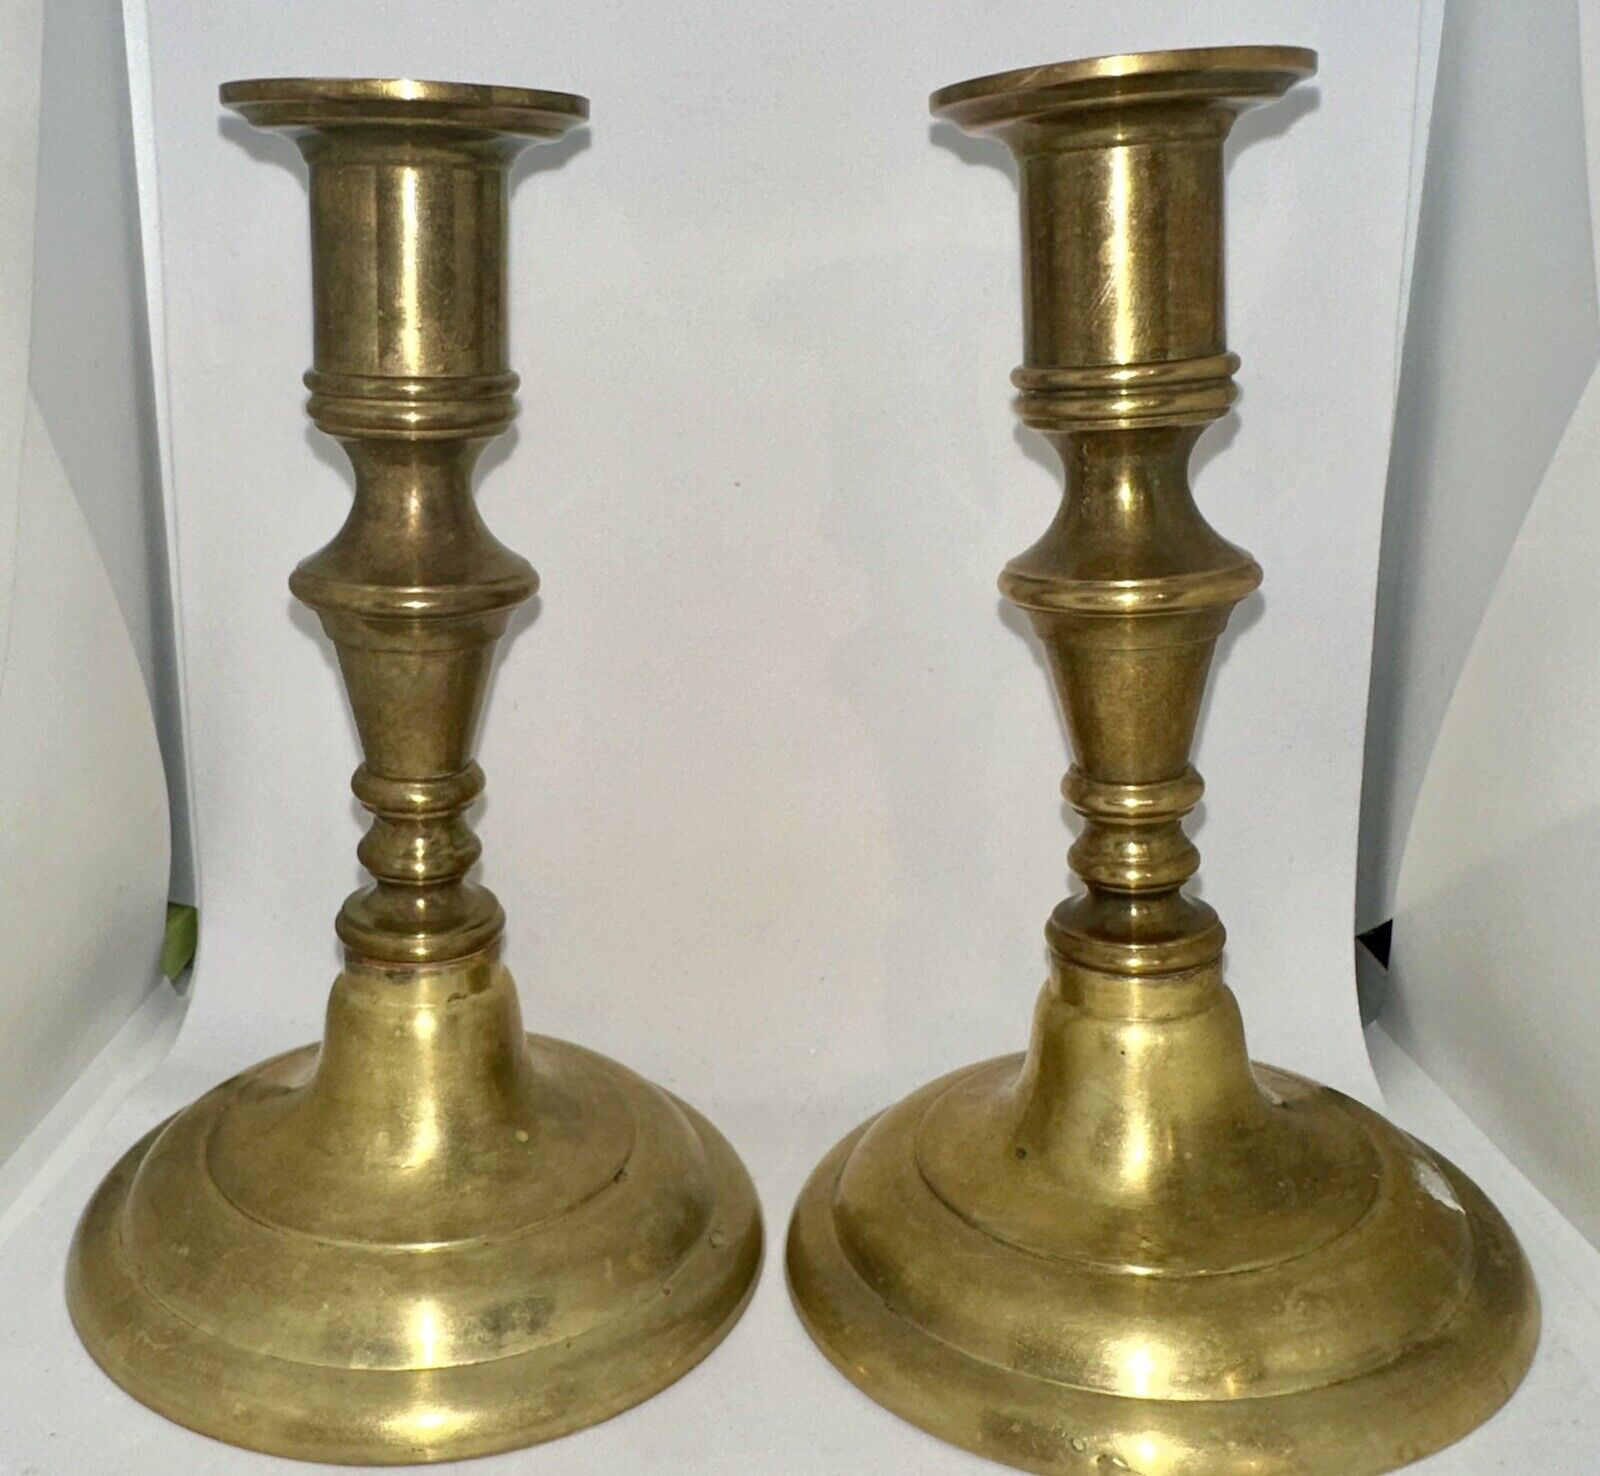 ANTIQUE S. EASTMAN CO. CONCORD, NH #2 SOLID BRASS CANDLE HOLDERS CANDLESTICKS